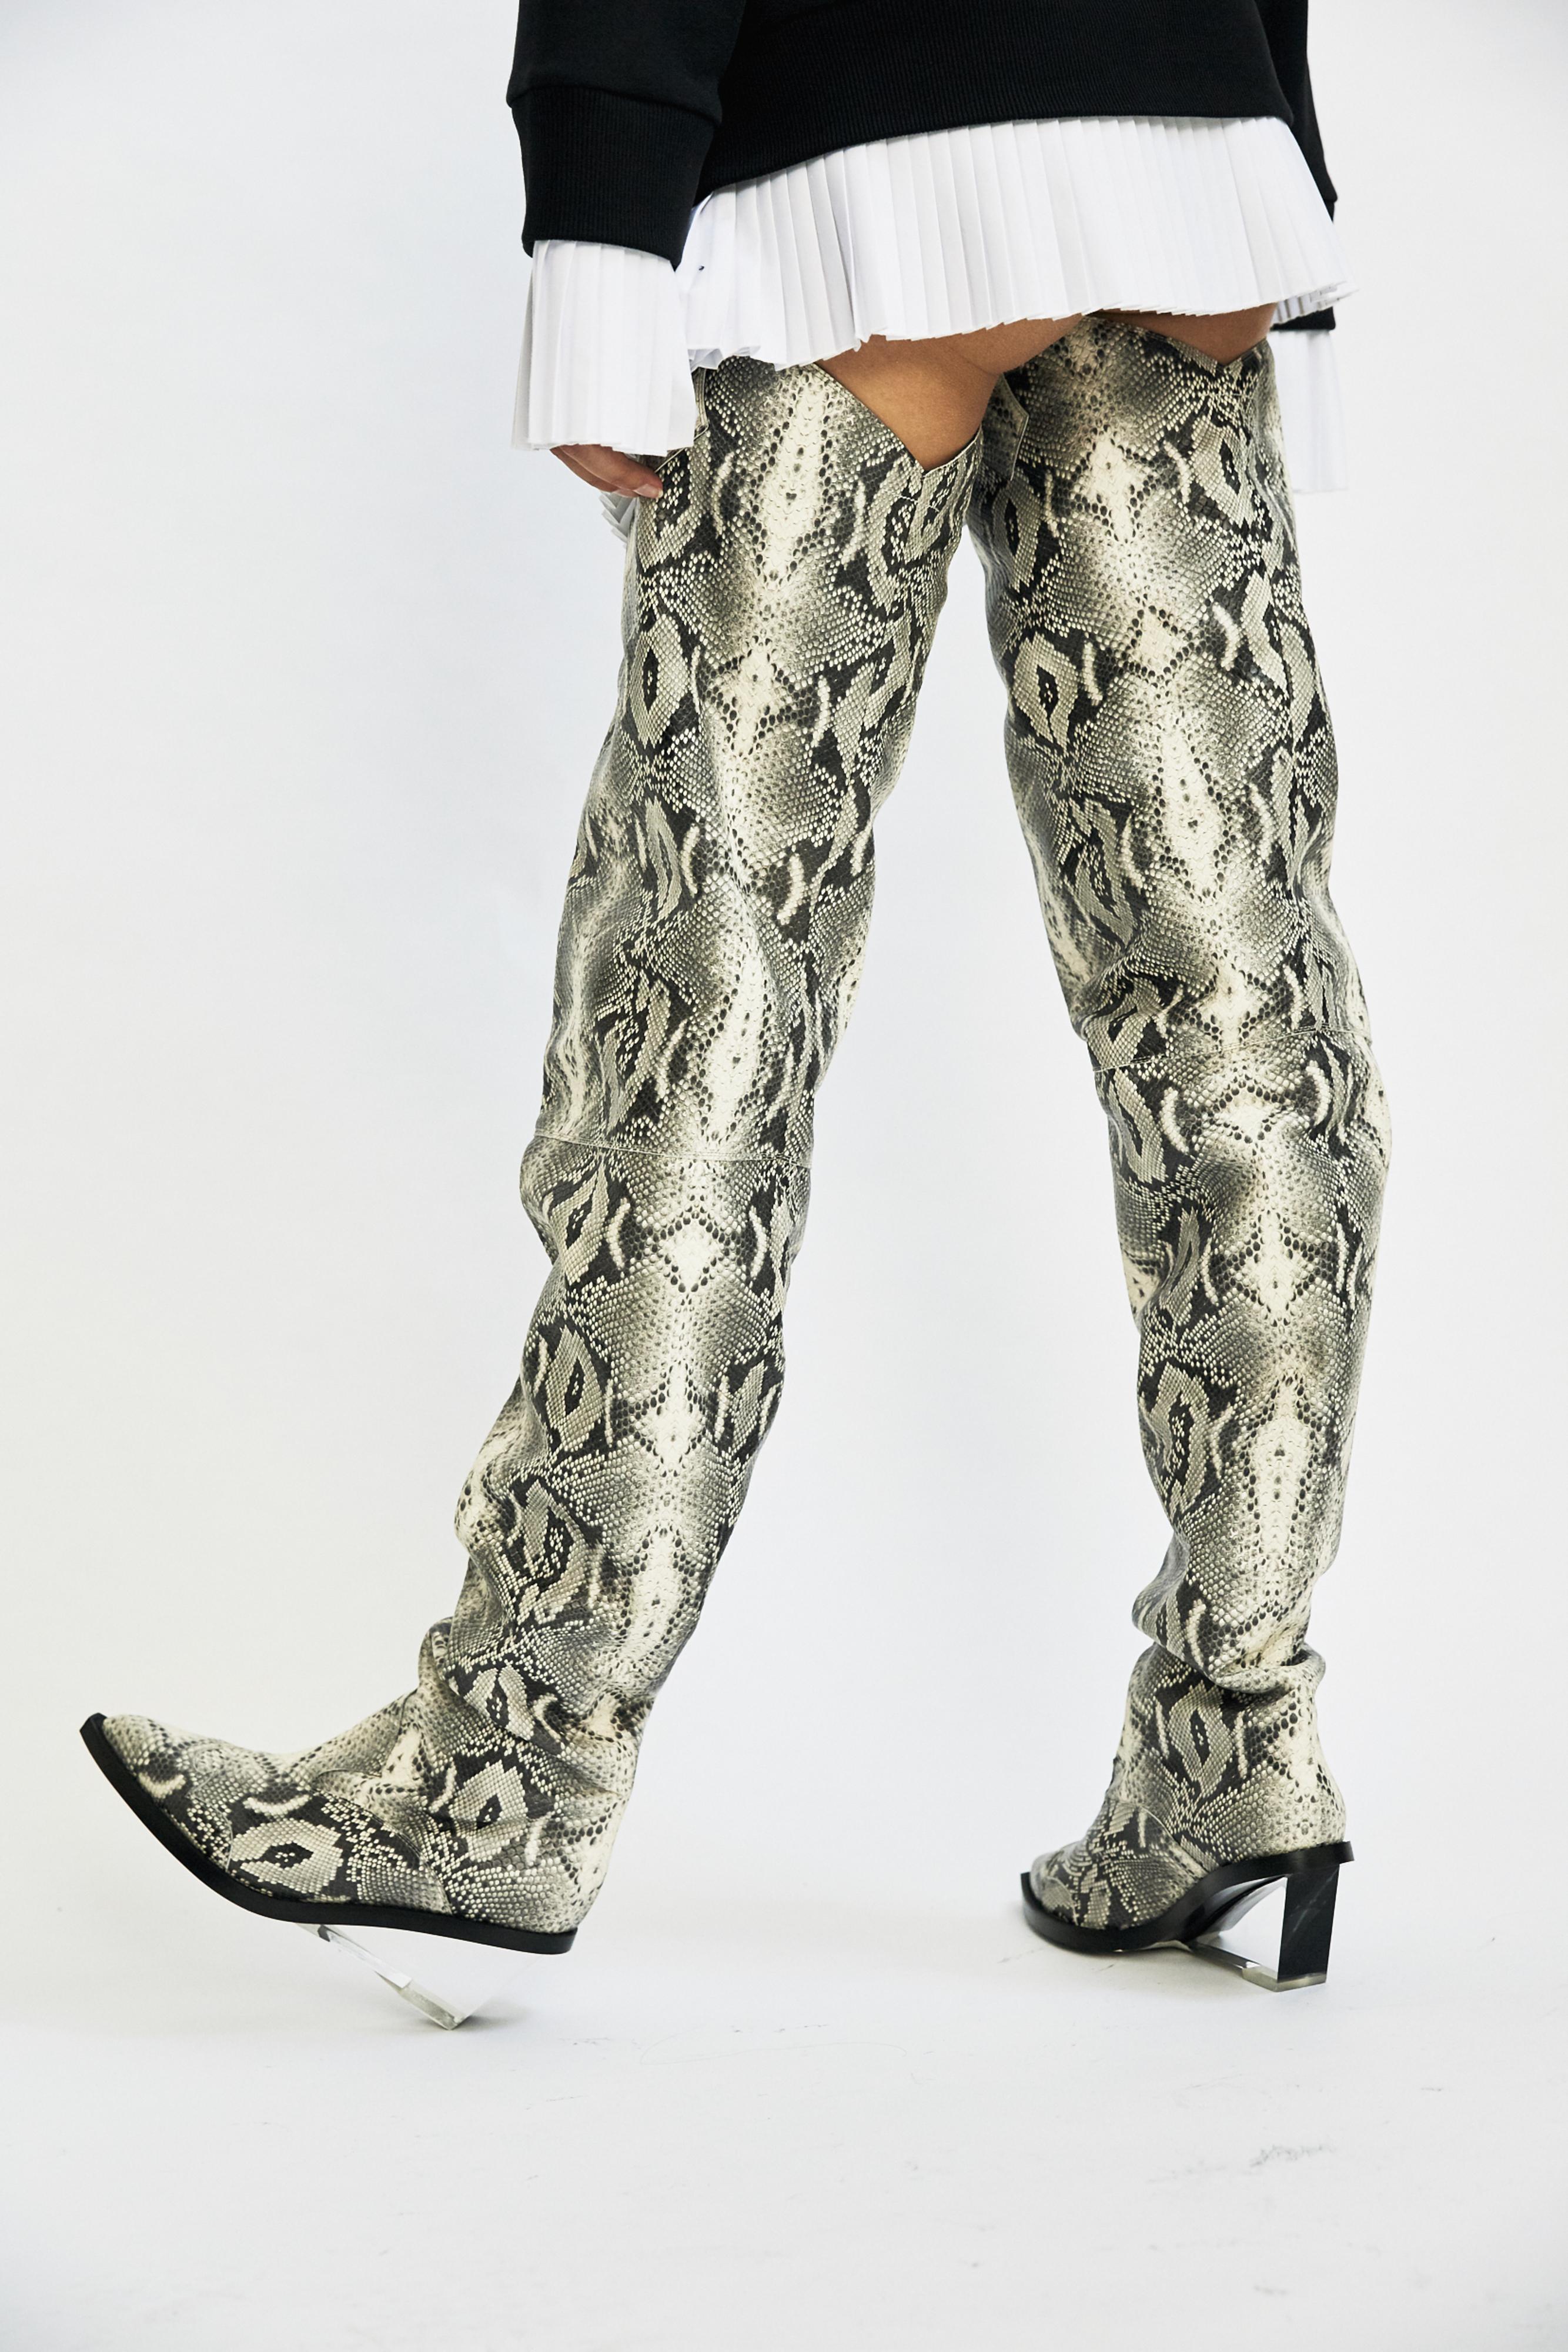 thigh snakeskin boots